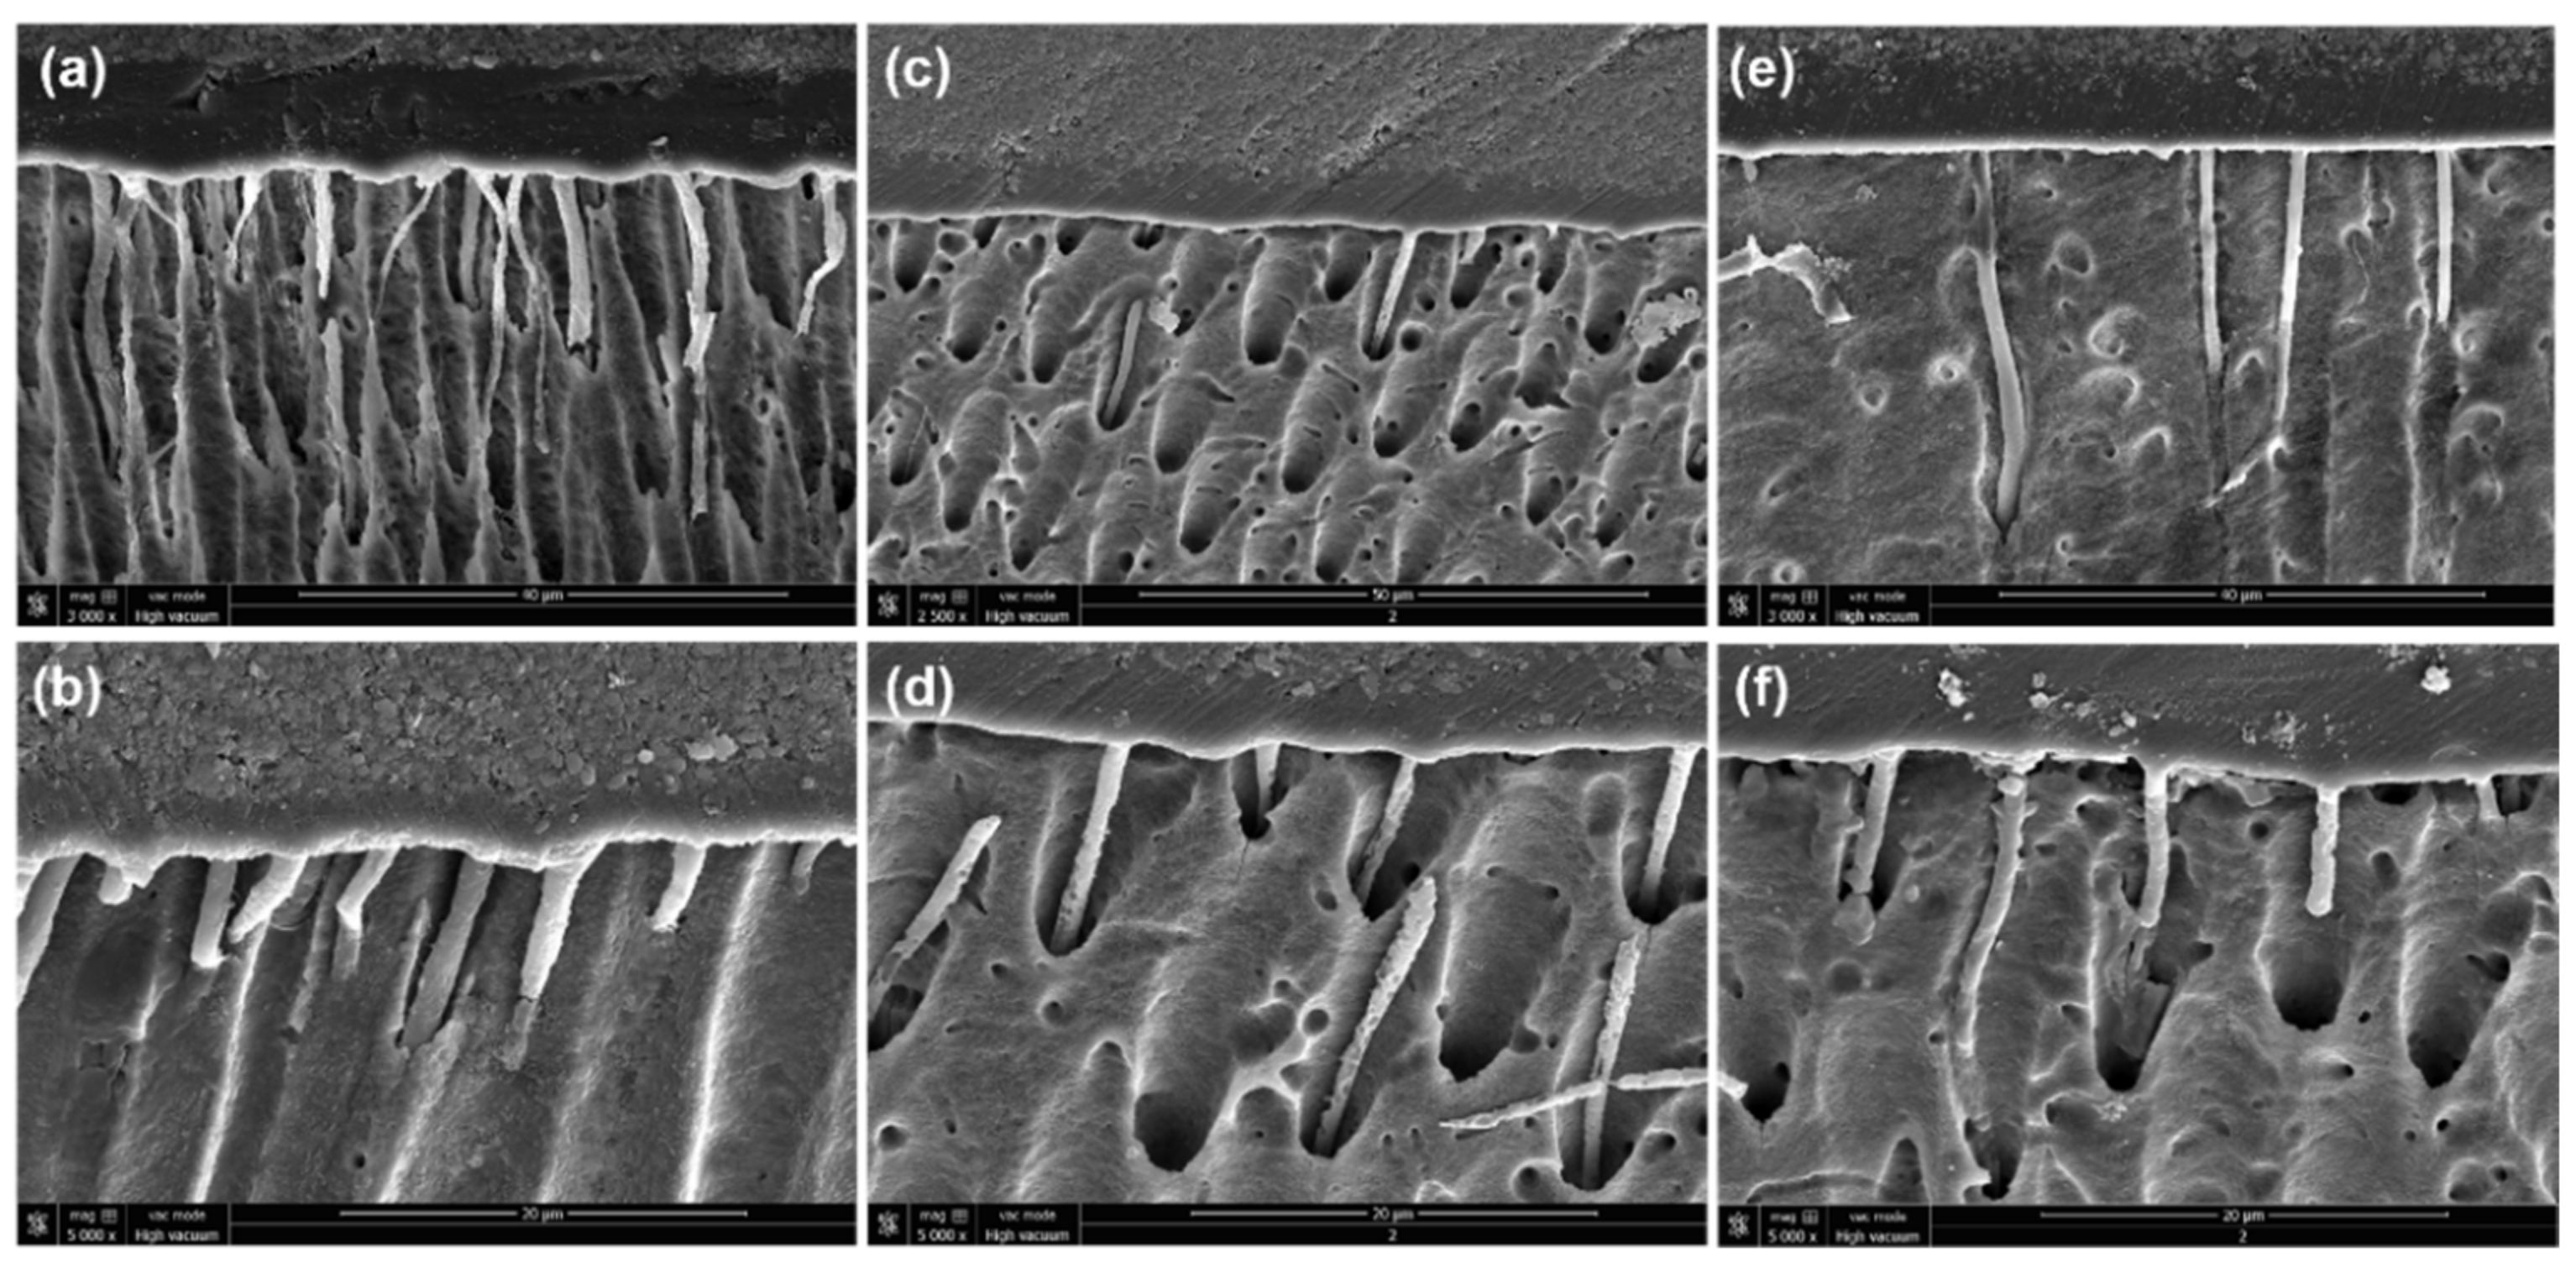 Polymers Free Full Text Antibacterial And Bonding Properties Of Universal Adhesive Dental Polymers Doped With Pyrogallol Html